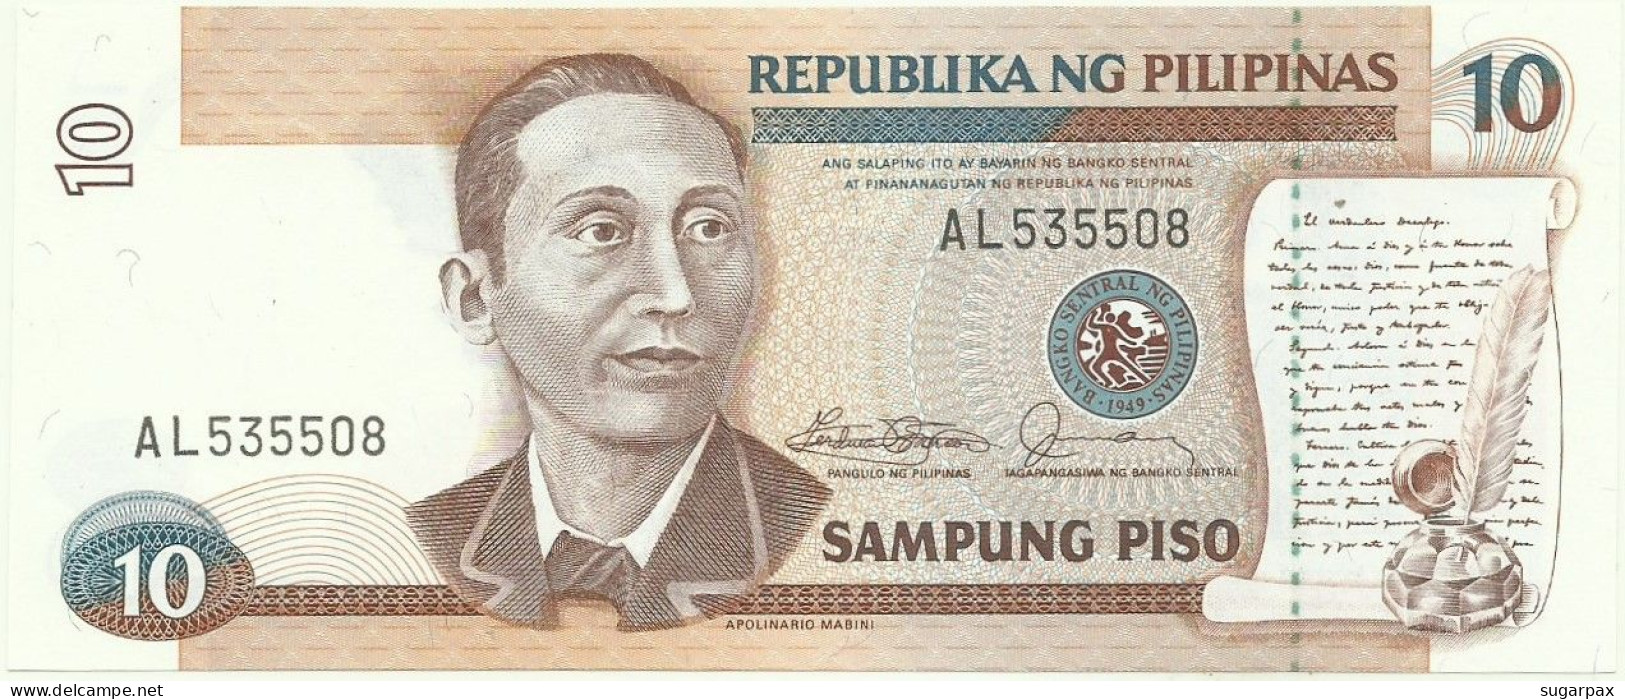 PHILIPPINES - 10 Piso - ND ( 1985 - 1994 ) Pick 169.a - Unc. - Sign. 10 - Serie AL - Seal Type 4 - Philippinen